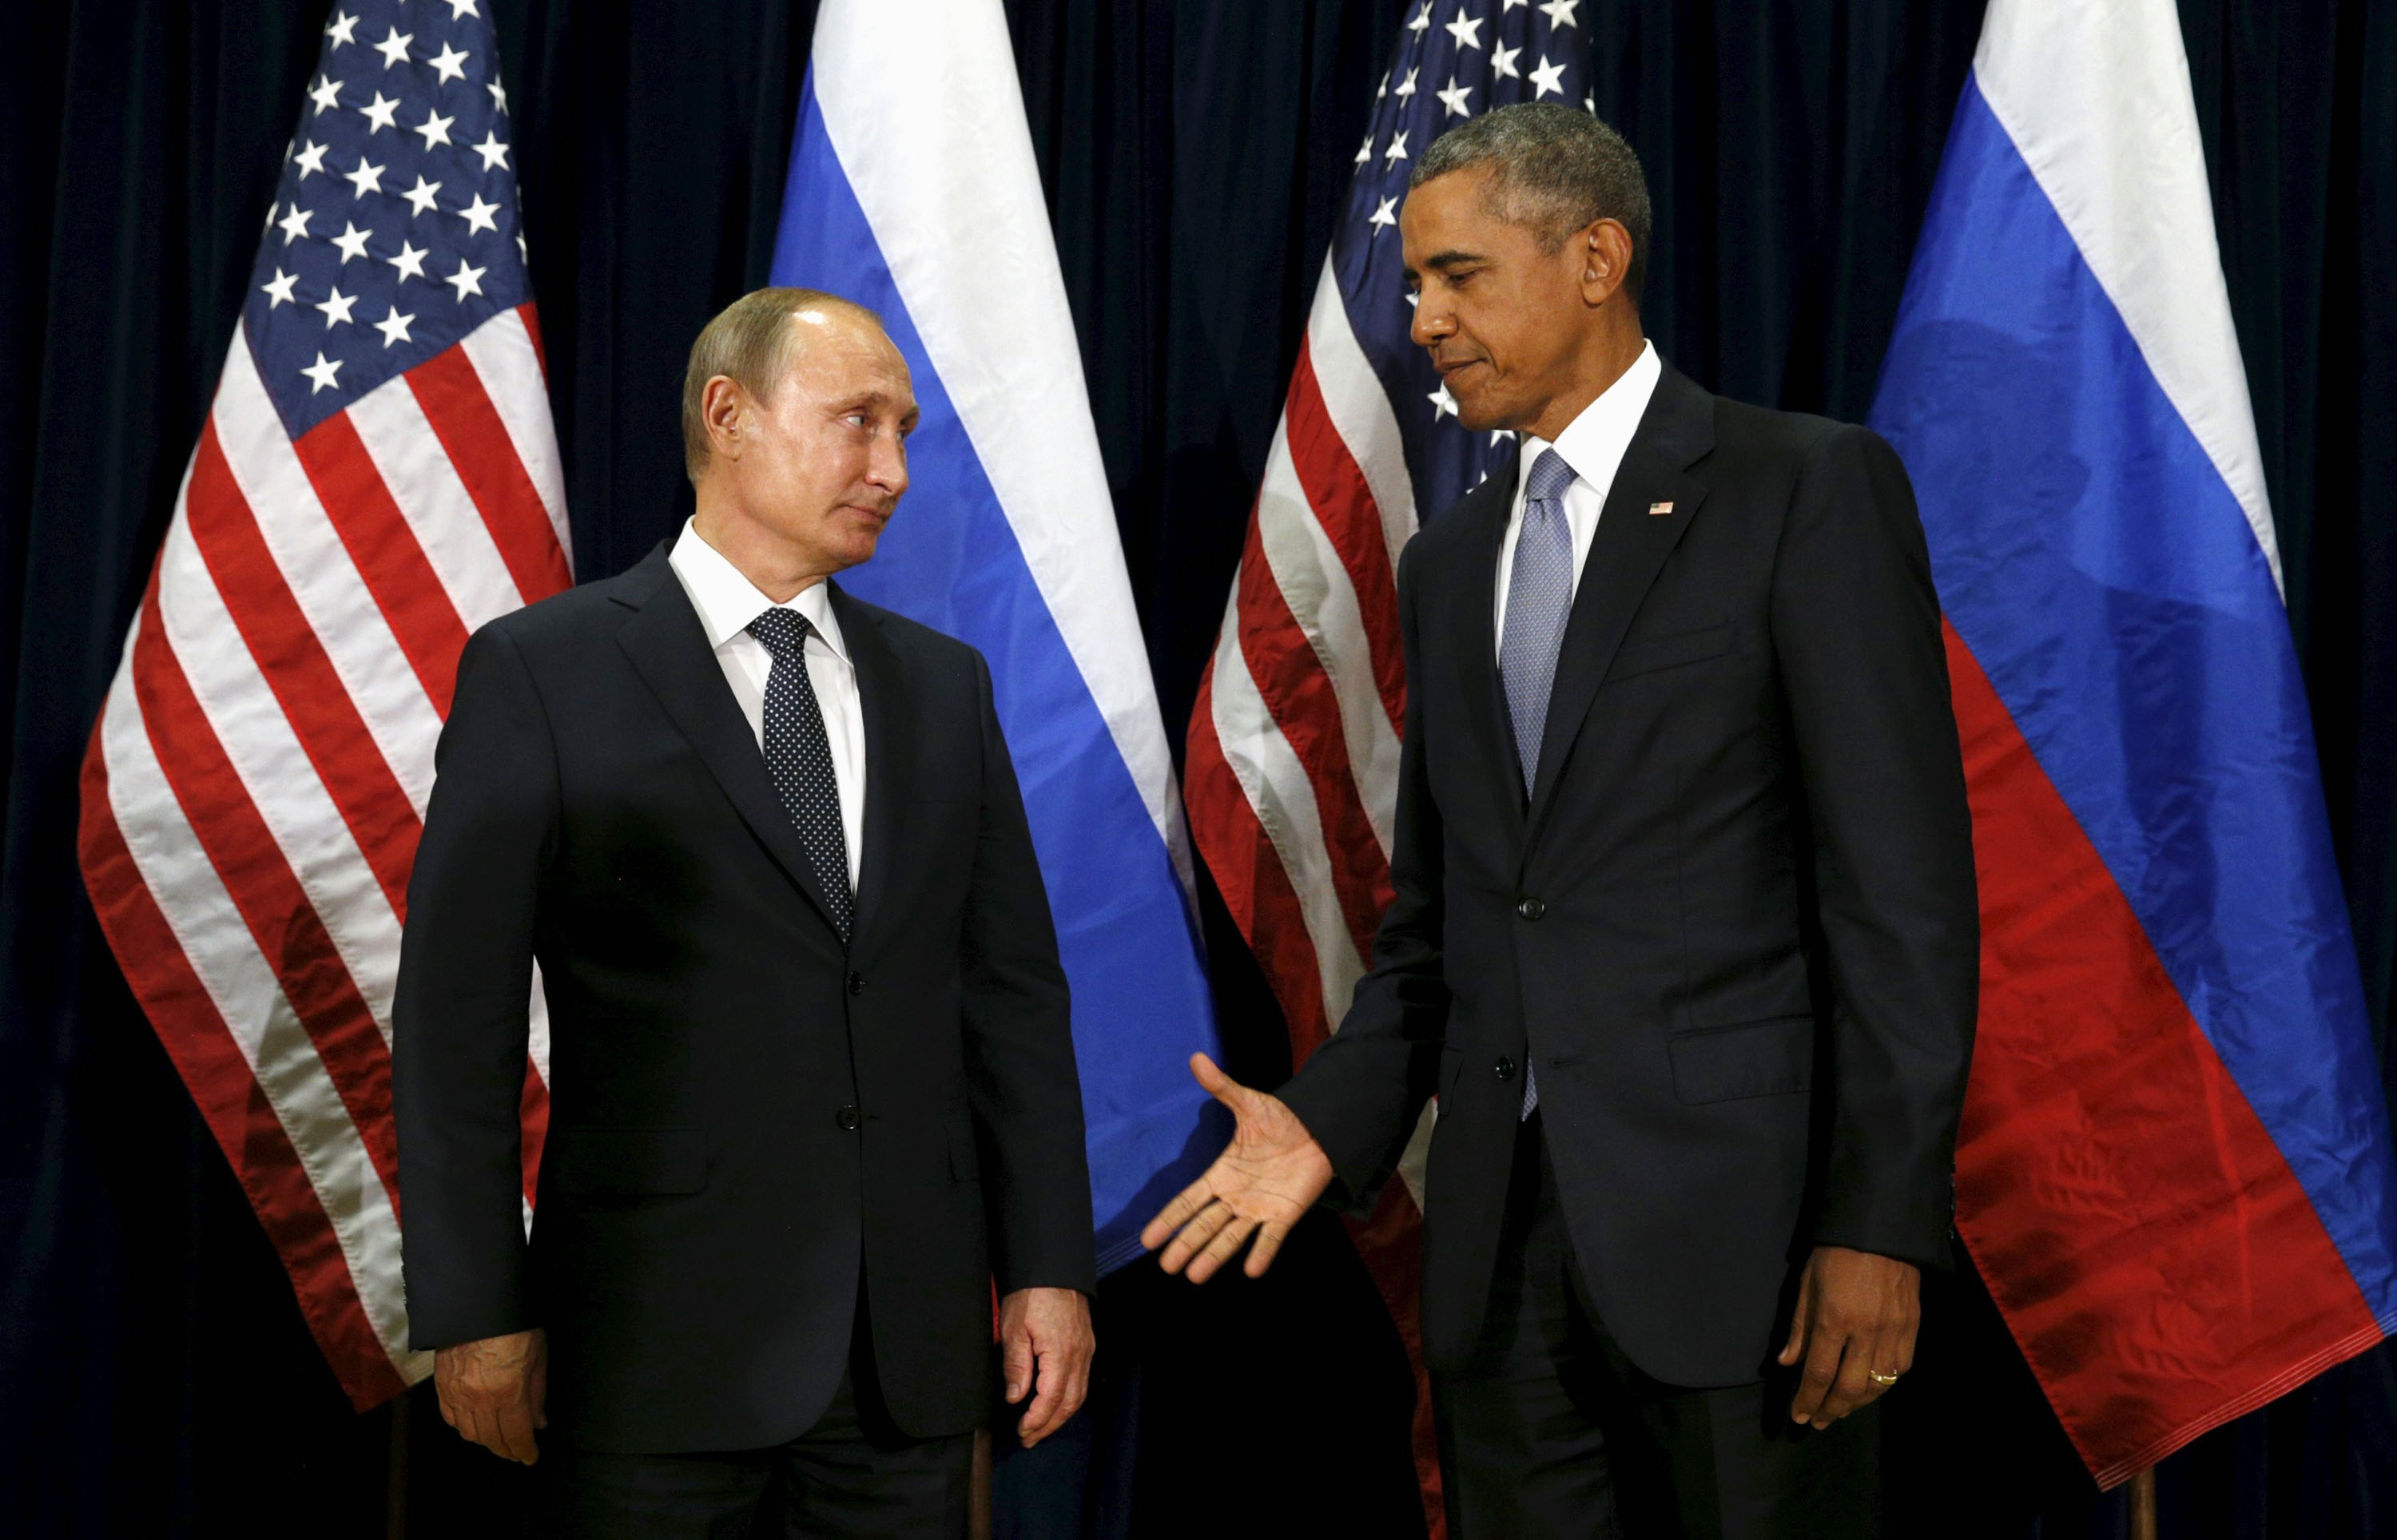 Putin and Obama discussed Syria at the U.N., meeting formally for the first time since 2013. (Kevin Lamarque—Reuters)